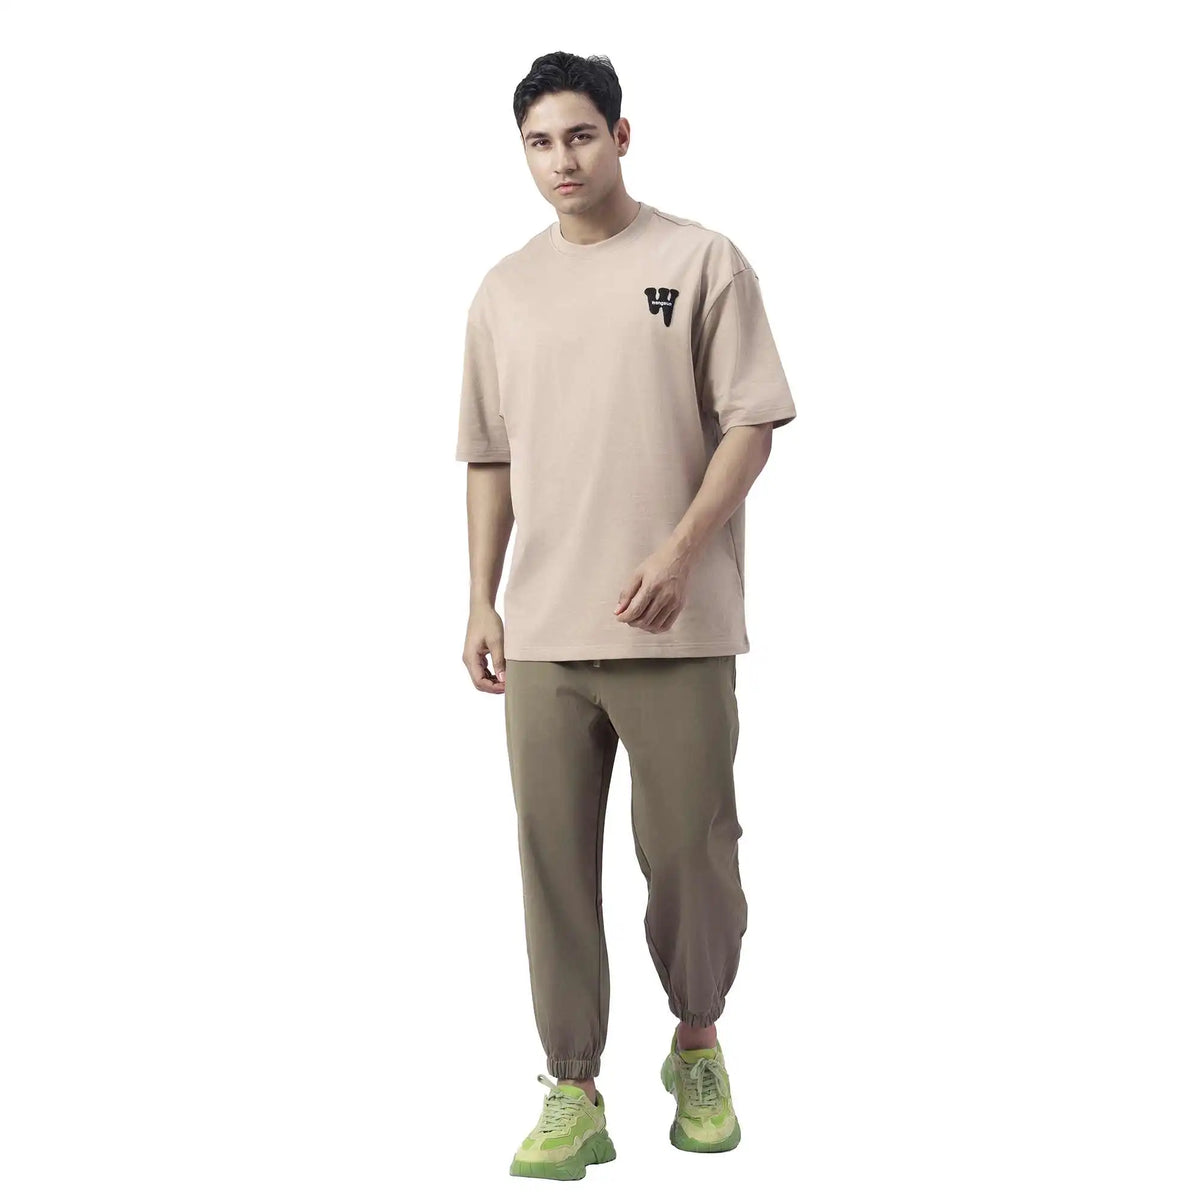 Ankle-Tied Causal Pants For Men